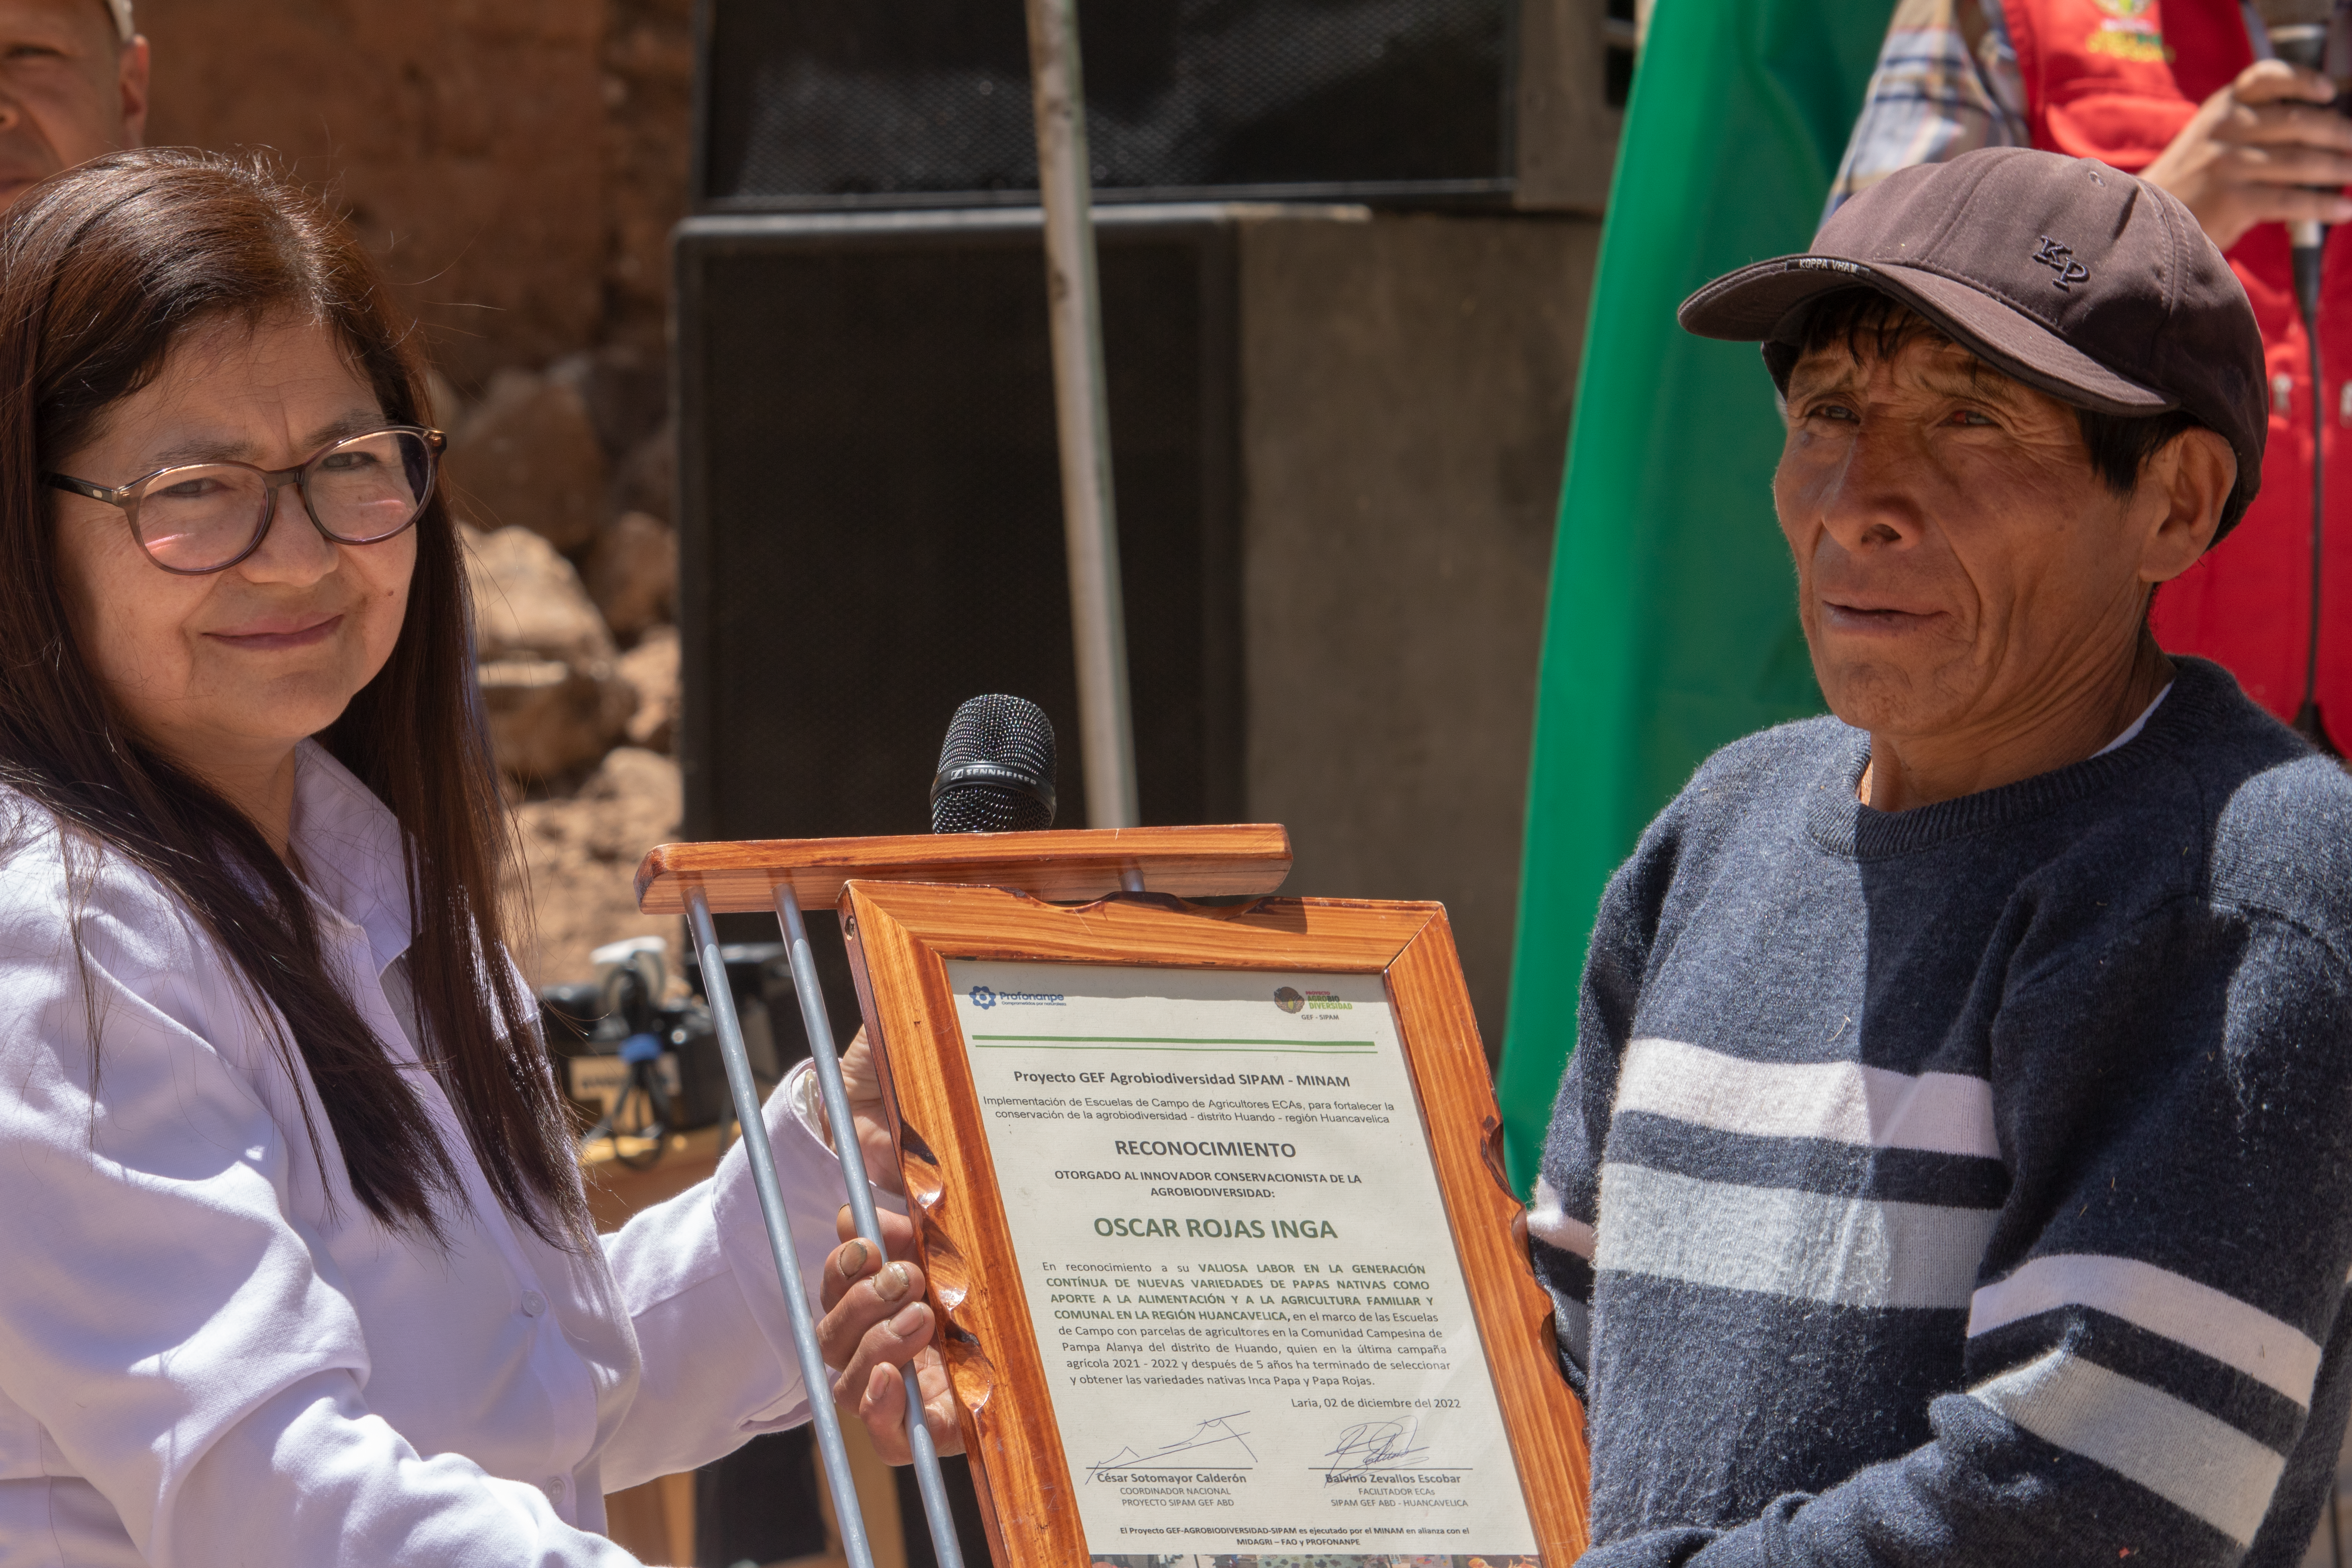 Yamina Silva recognizes the work of Oscar Rojas, a farmer from the Farmers' Field Schools (ECAs) in the district of Huando, Huancavelica, for being an innovative character who preserves and breeds 135 varieties of native potatoes. Óscar also obtained 2 new native varieties of potatoes which he named “Inca Papa” and “Papa Rojas”.